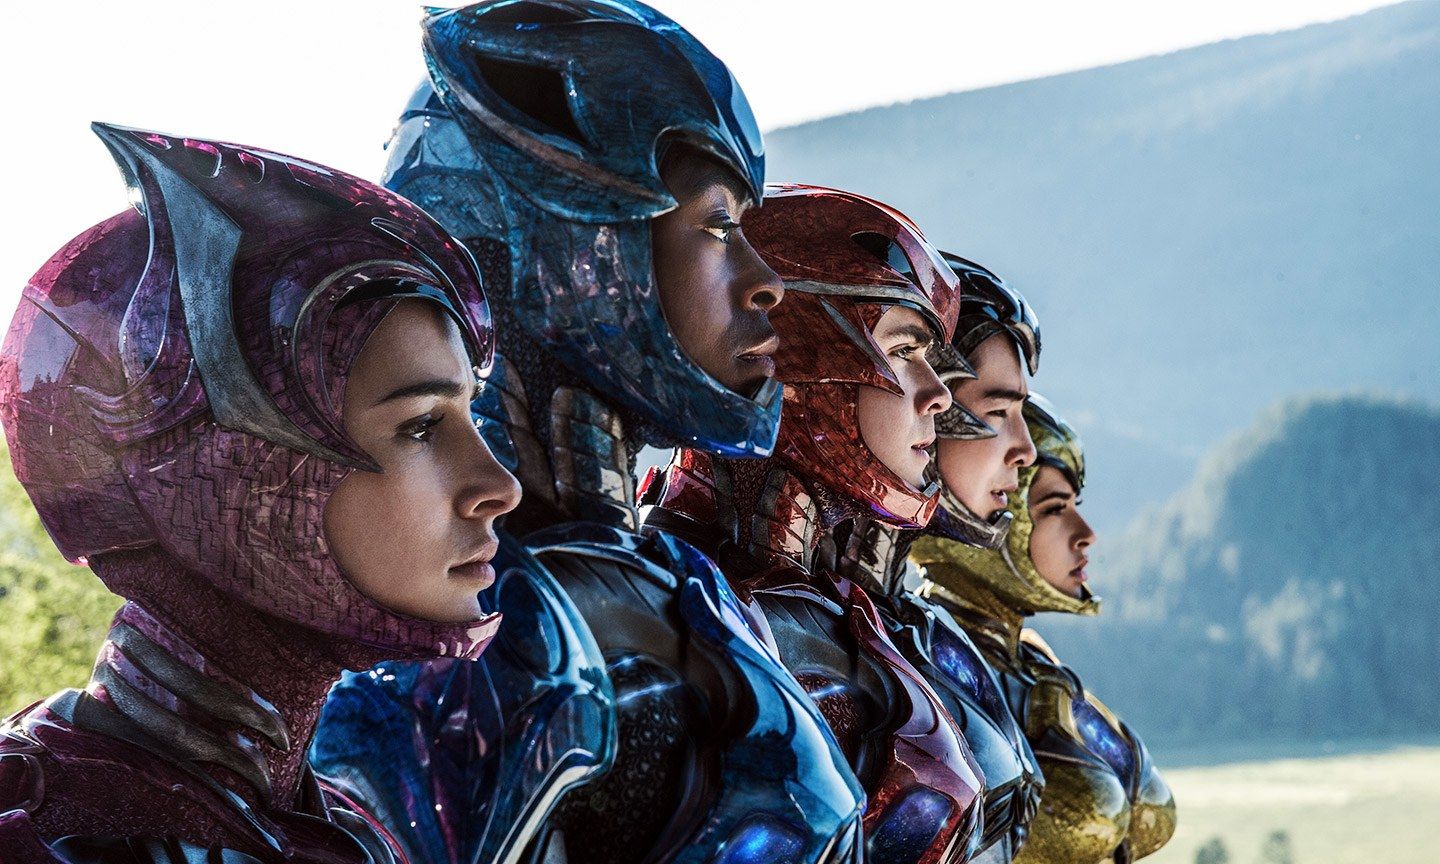 Confused About the New Power Rangers Movie? Here's a Handy Primer